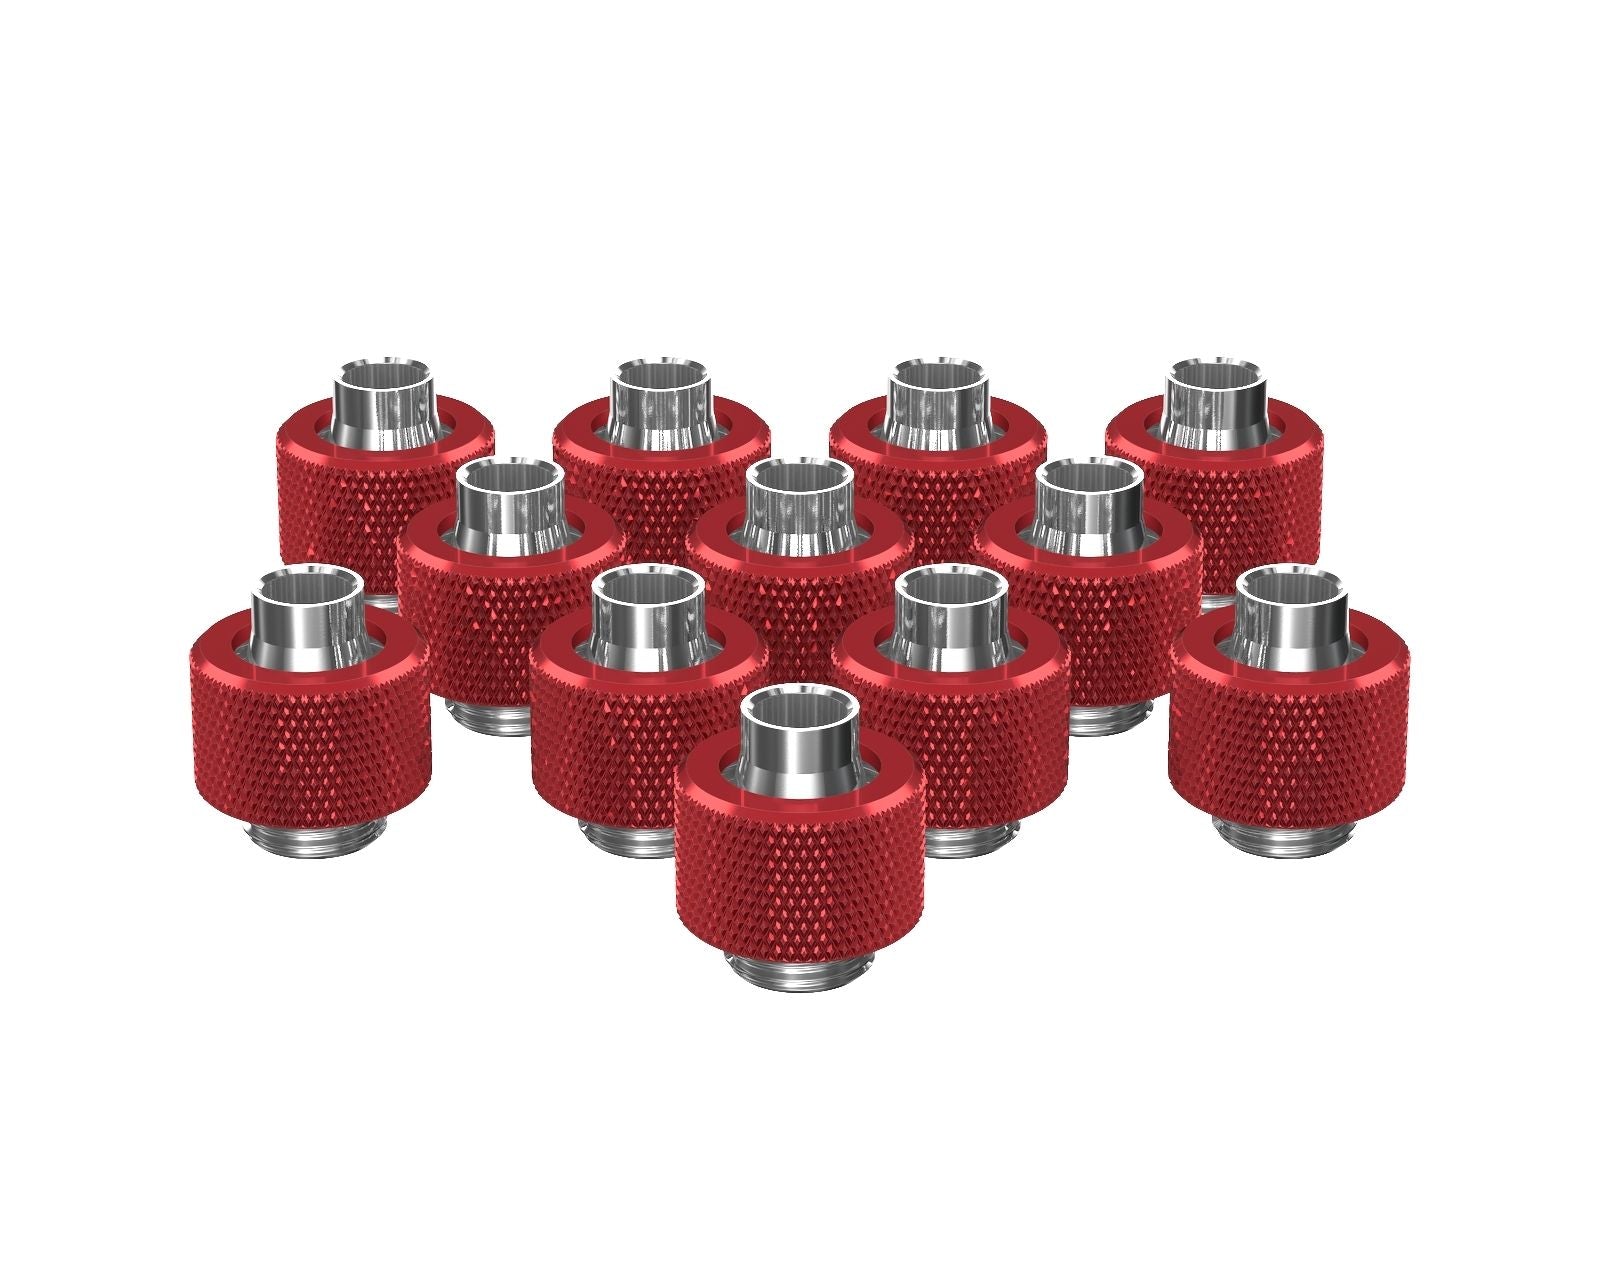 PrimoChill SecureFit SX - Premium Compression Fitting For 3/8in ID x 1/2in OD Flexible Tubing 12 Pack (F-SFSX12-12) - Available in 20+ Colors, Custom Watercooling Loop Ready - Candy Red